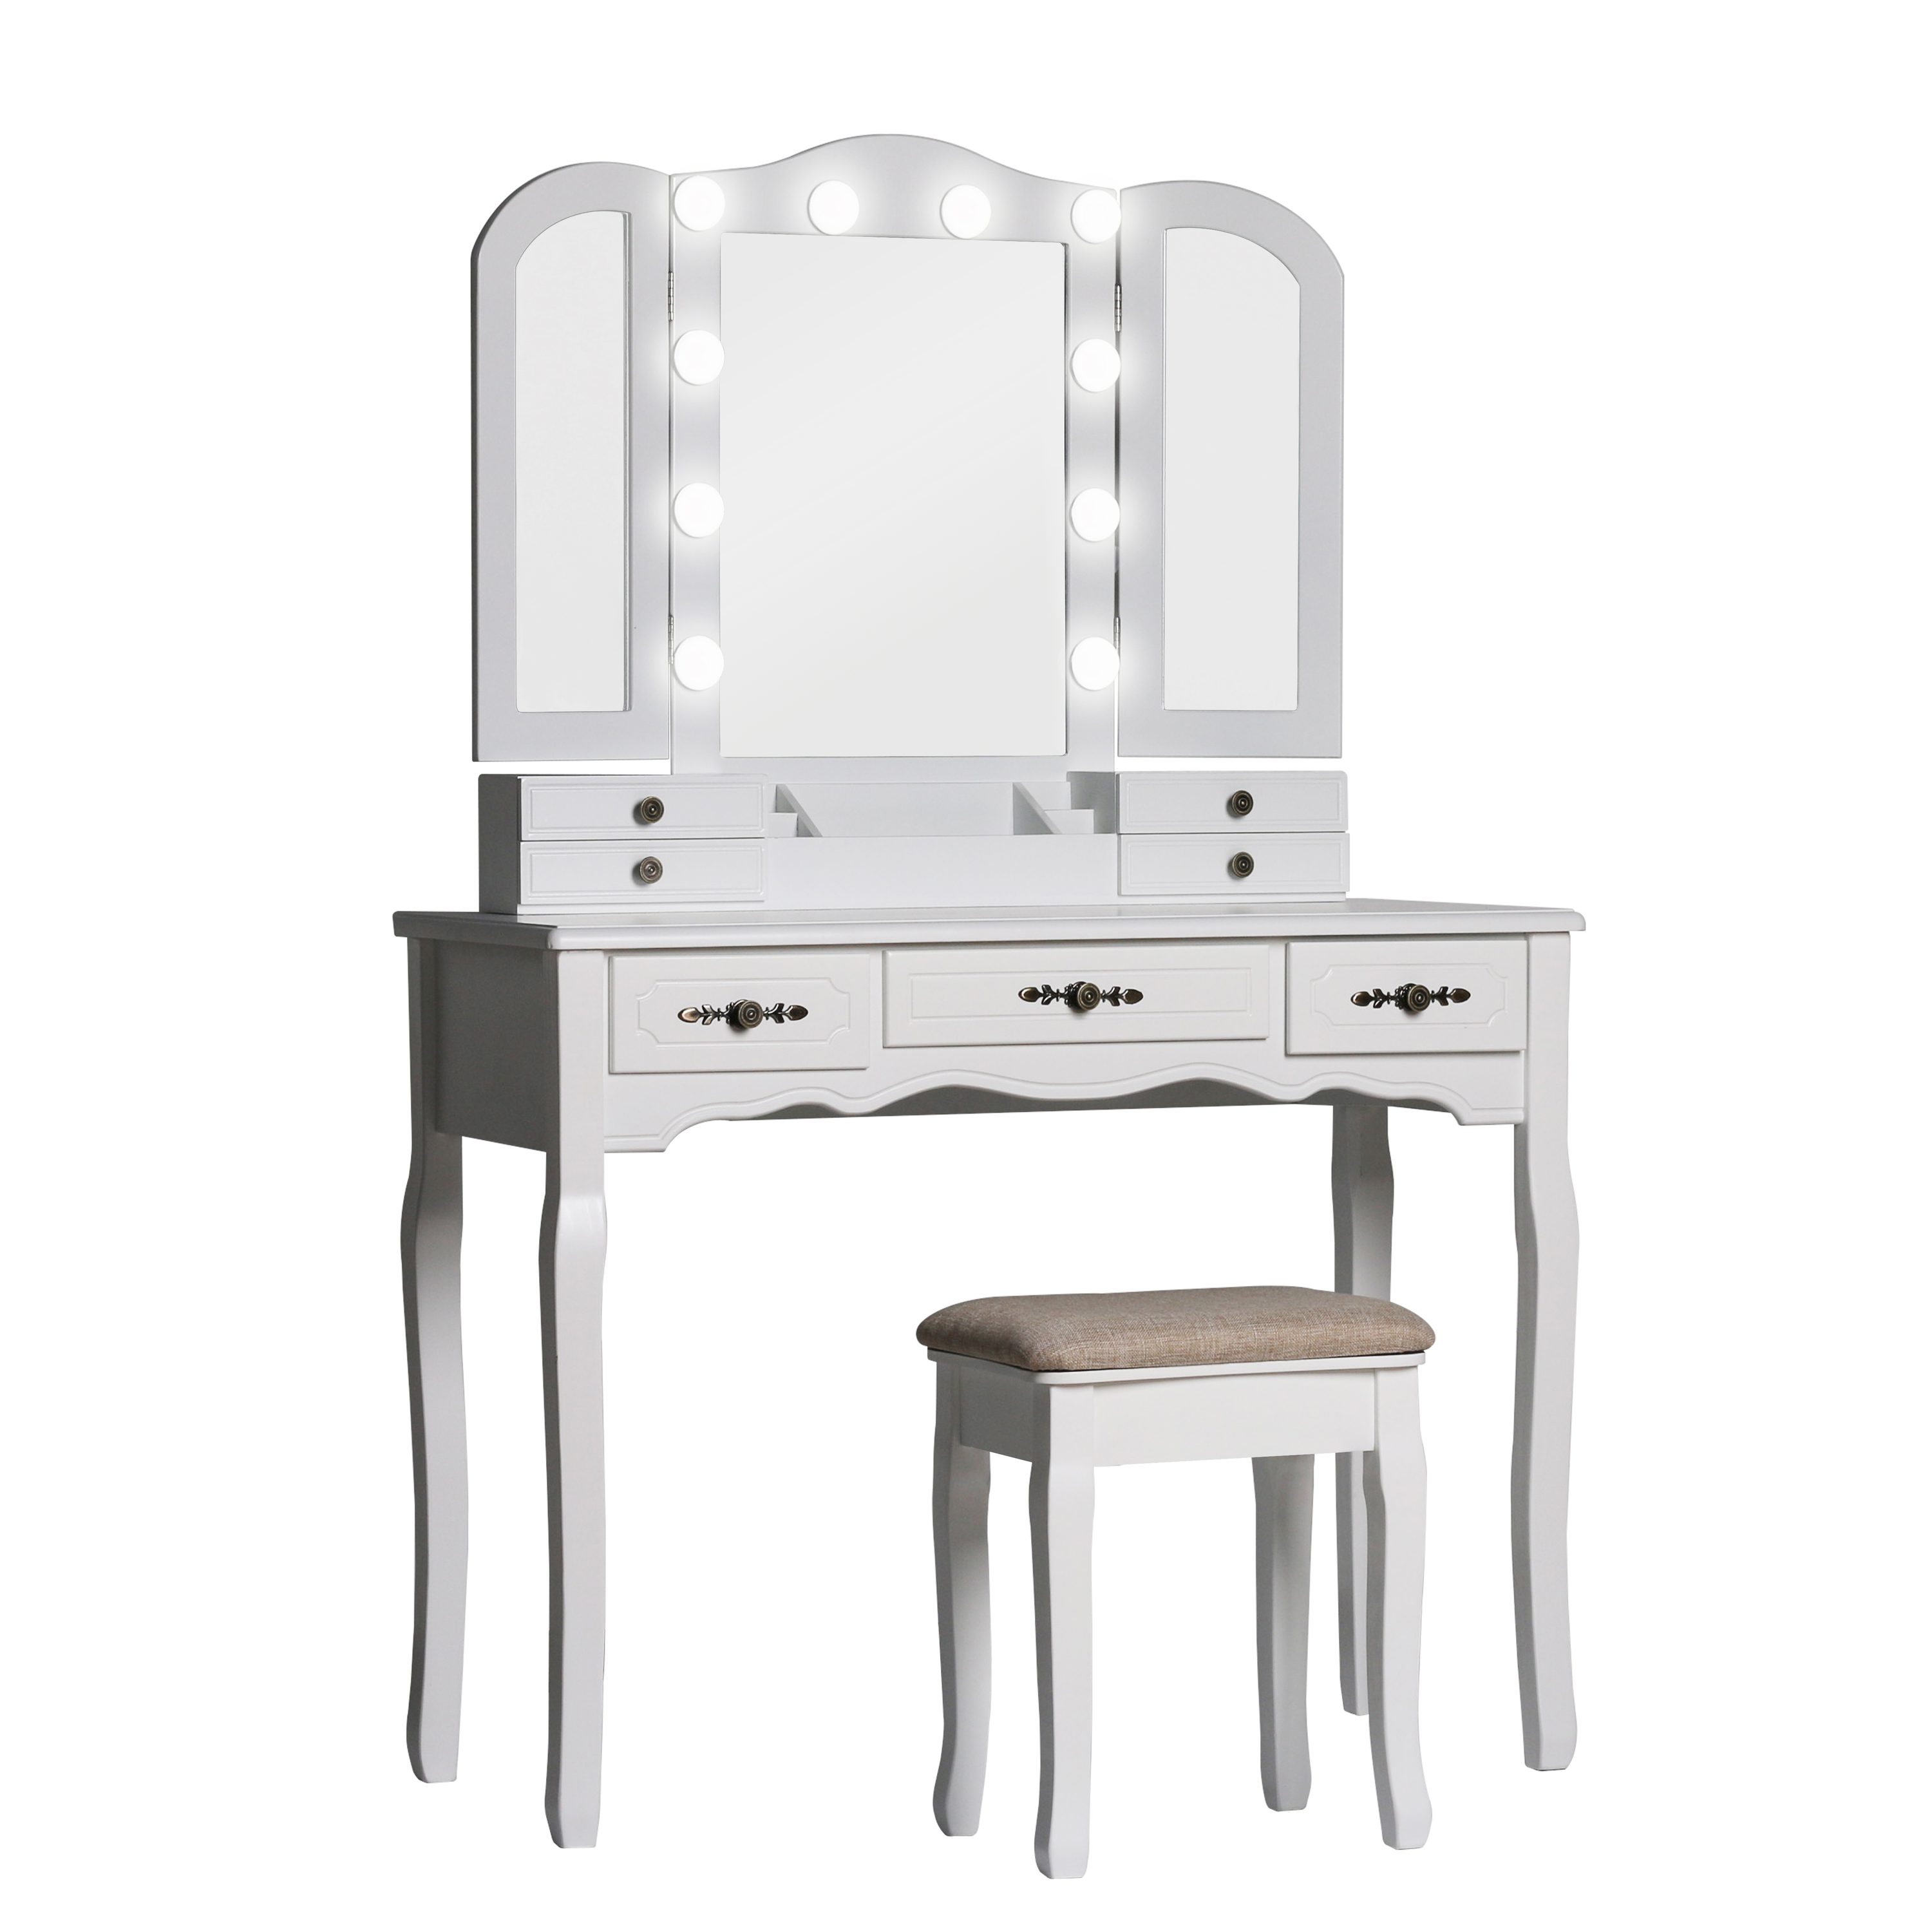 Veikous Makeup Vanity Desk Set With, White Vanity Table With Drawers